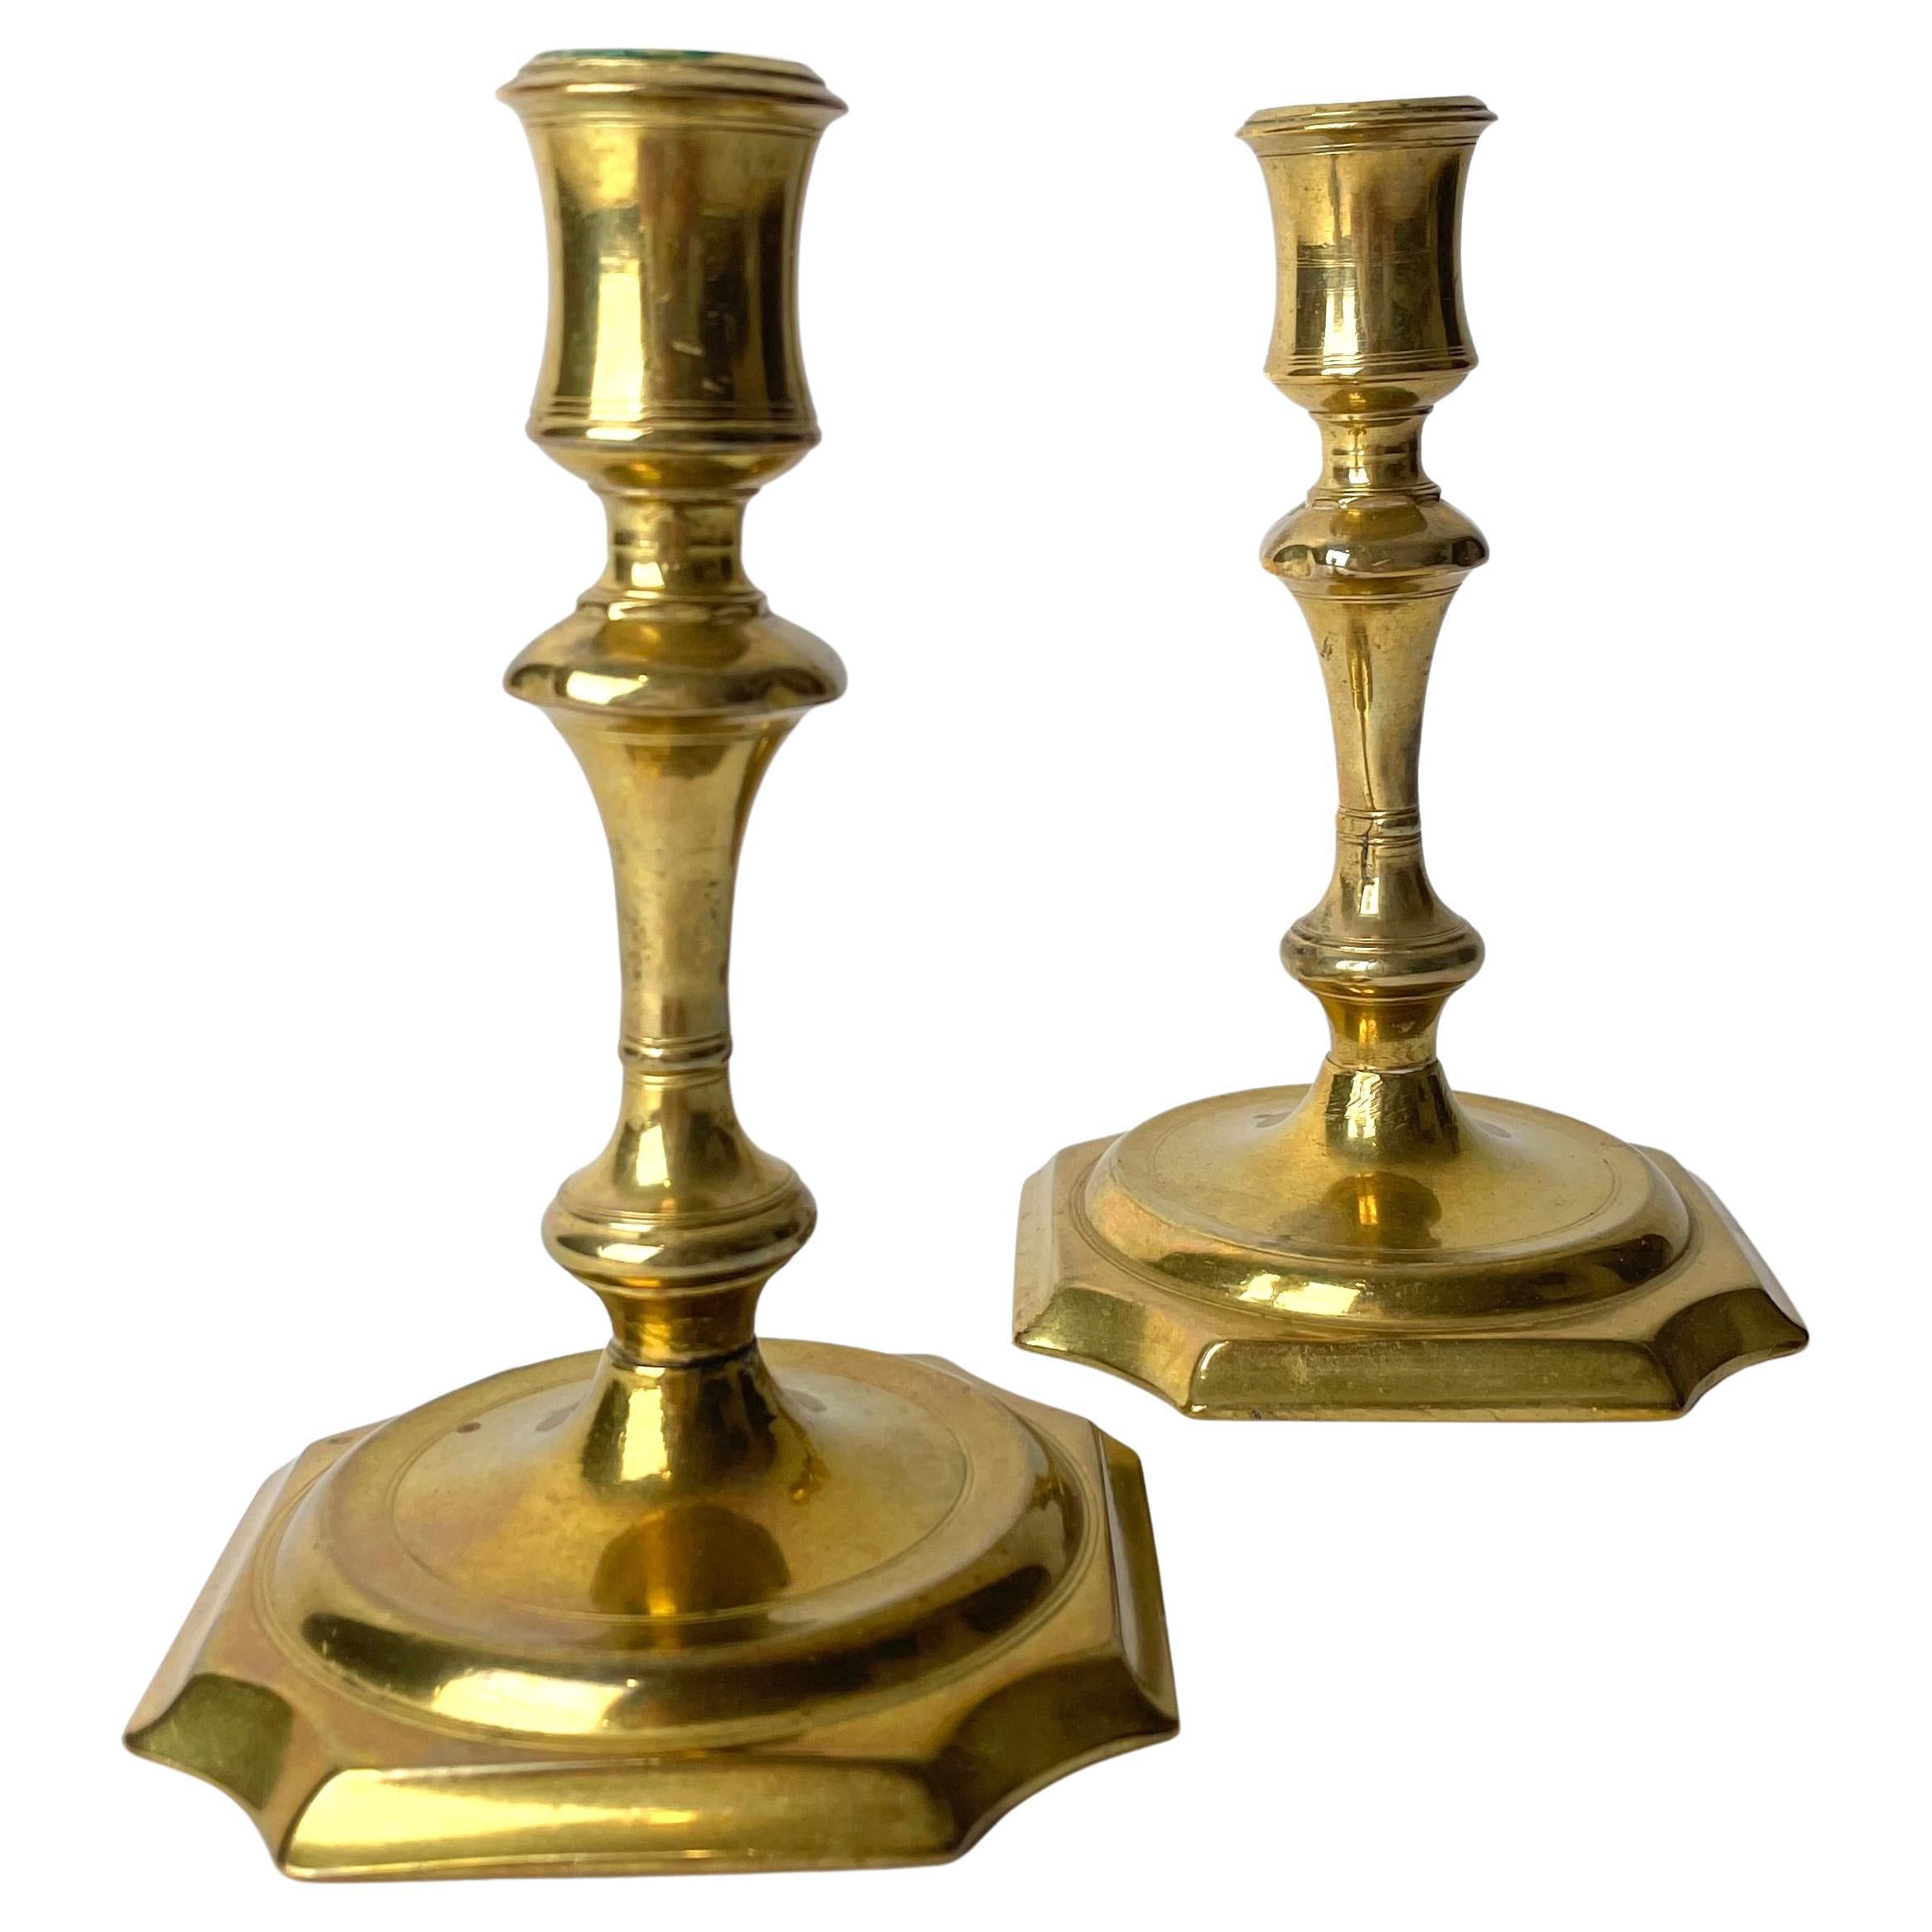 A Pair of 2 Lovely Brass Candlesticks, Late Baroque, Early 18th Century